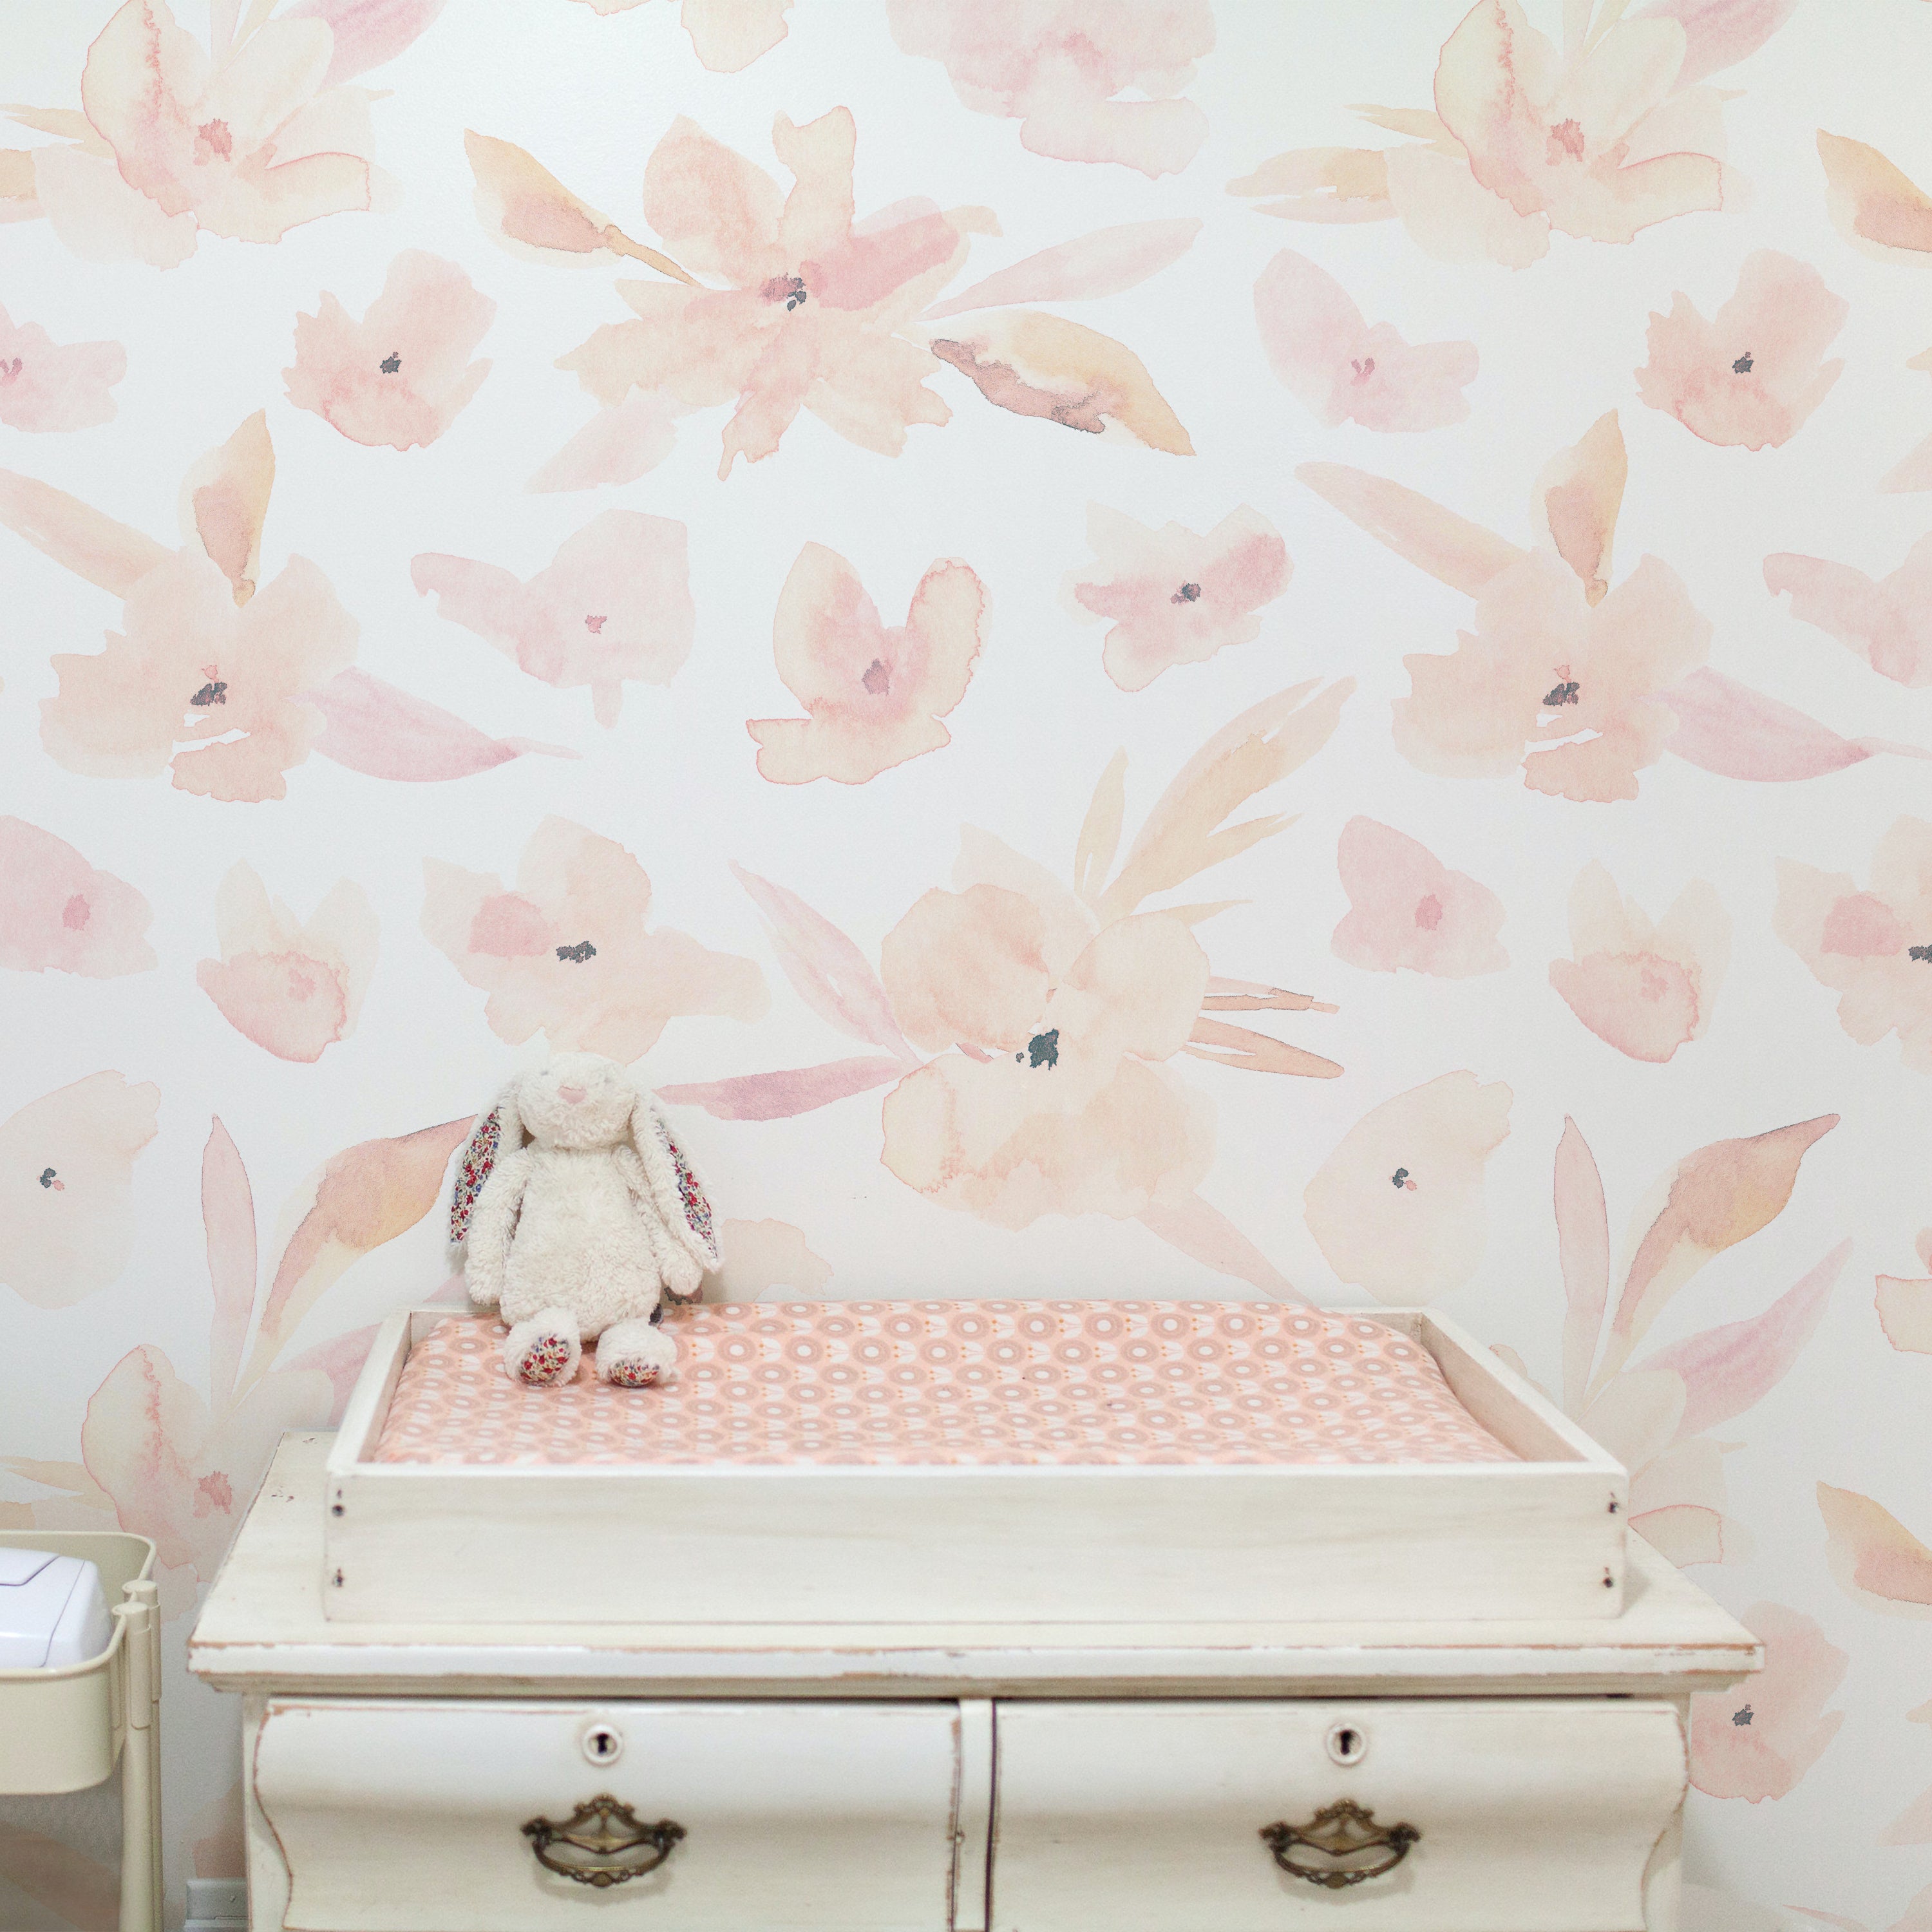 A charming nursery corner with the Florelegance Wallpaper adorning the walls, accompanied by a vintage white changing table and a cuddly stuffed rabbit, enhancing the room's soothing and graceful aesthetic.